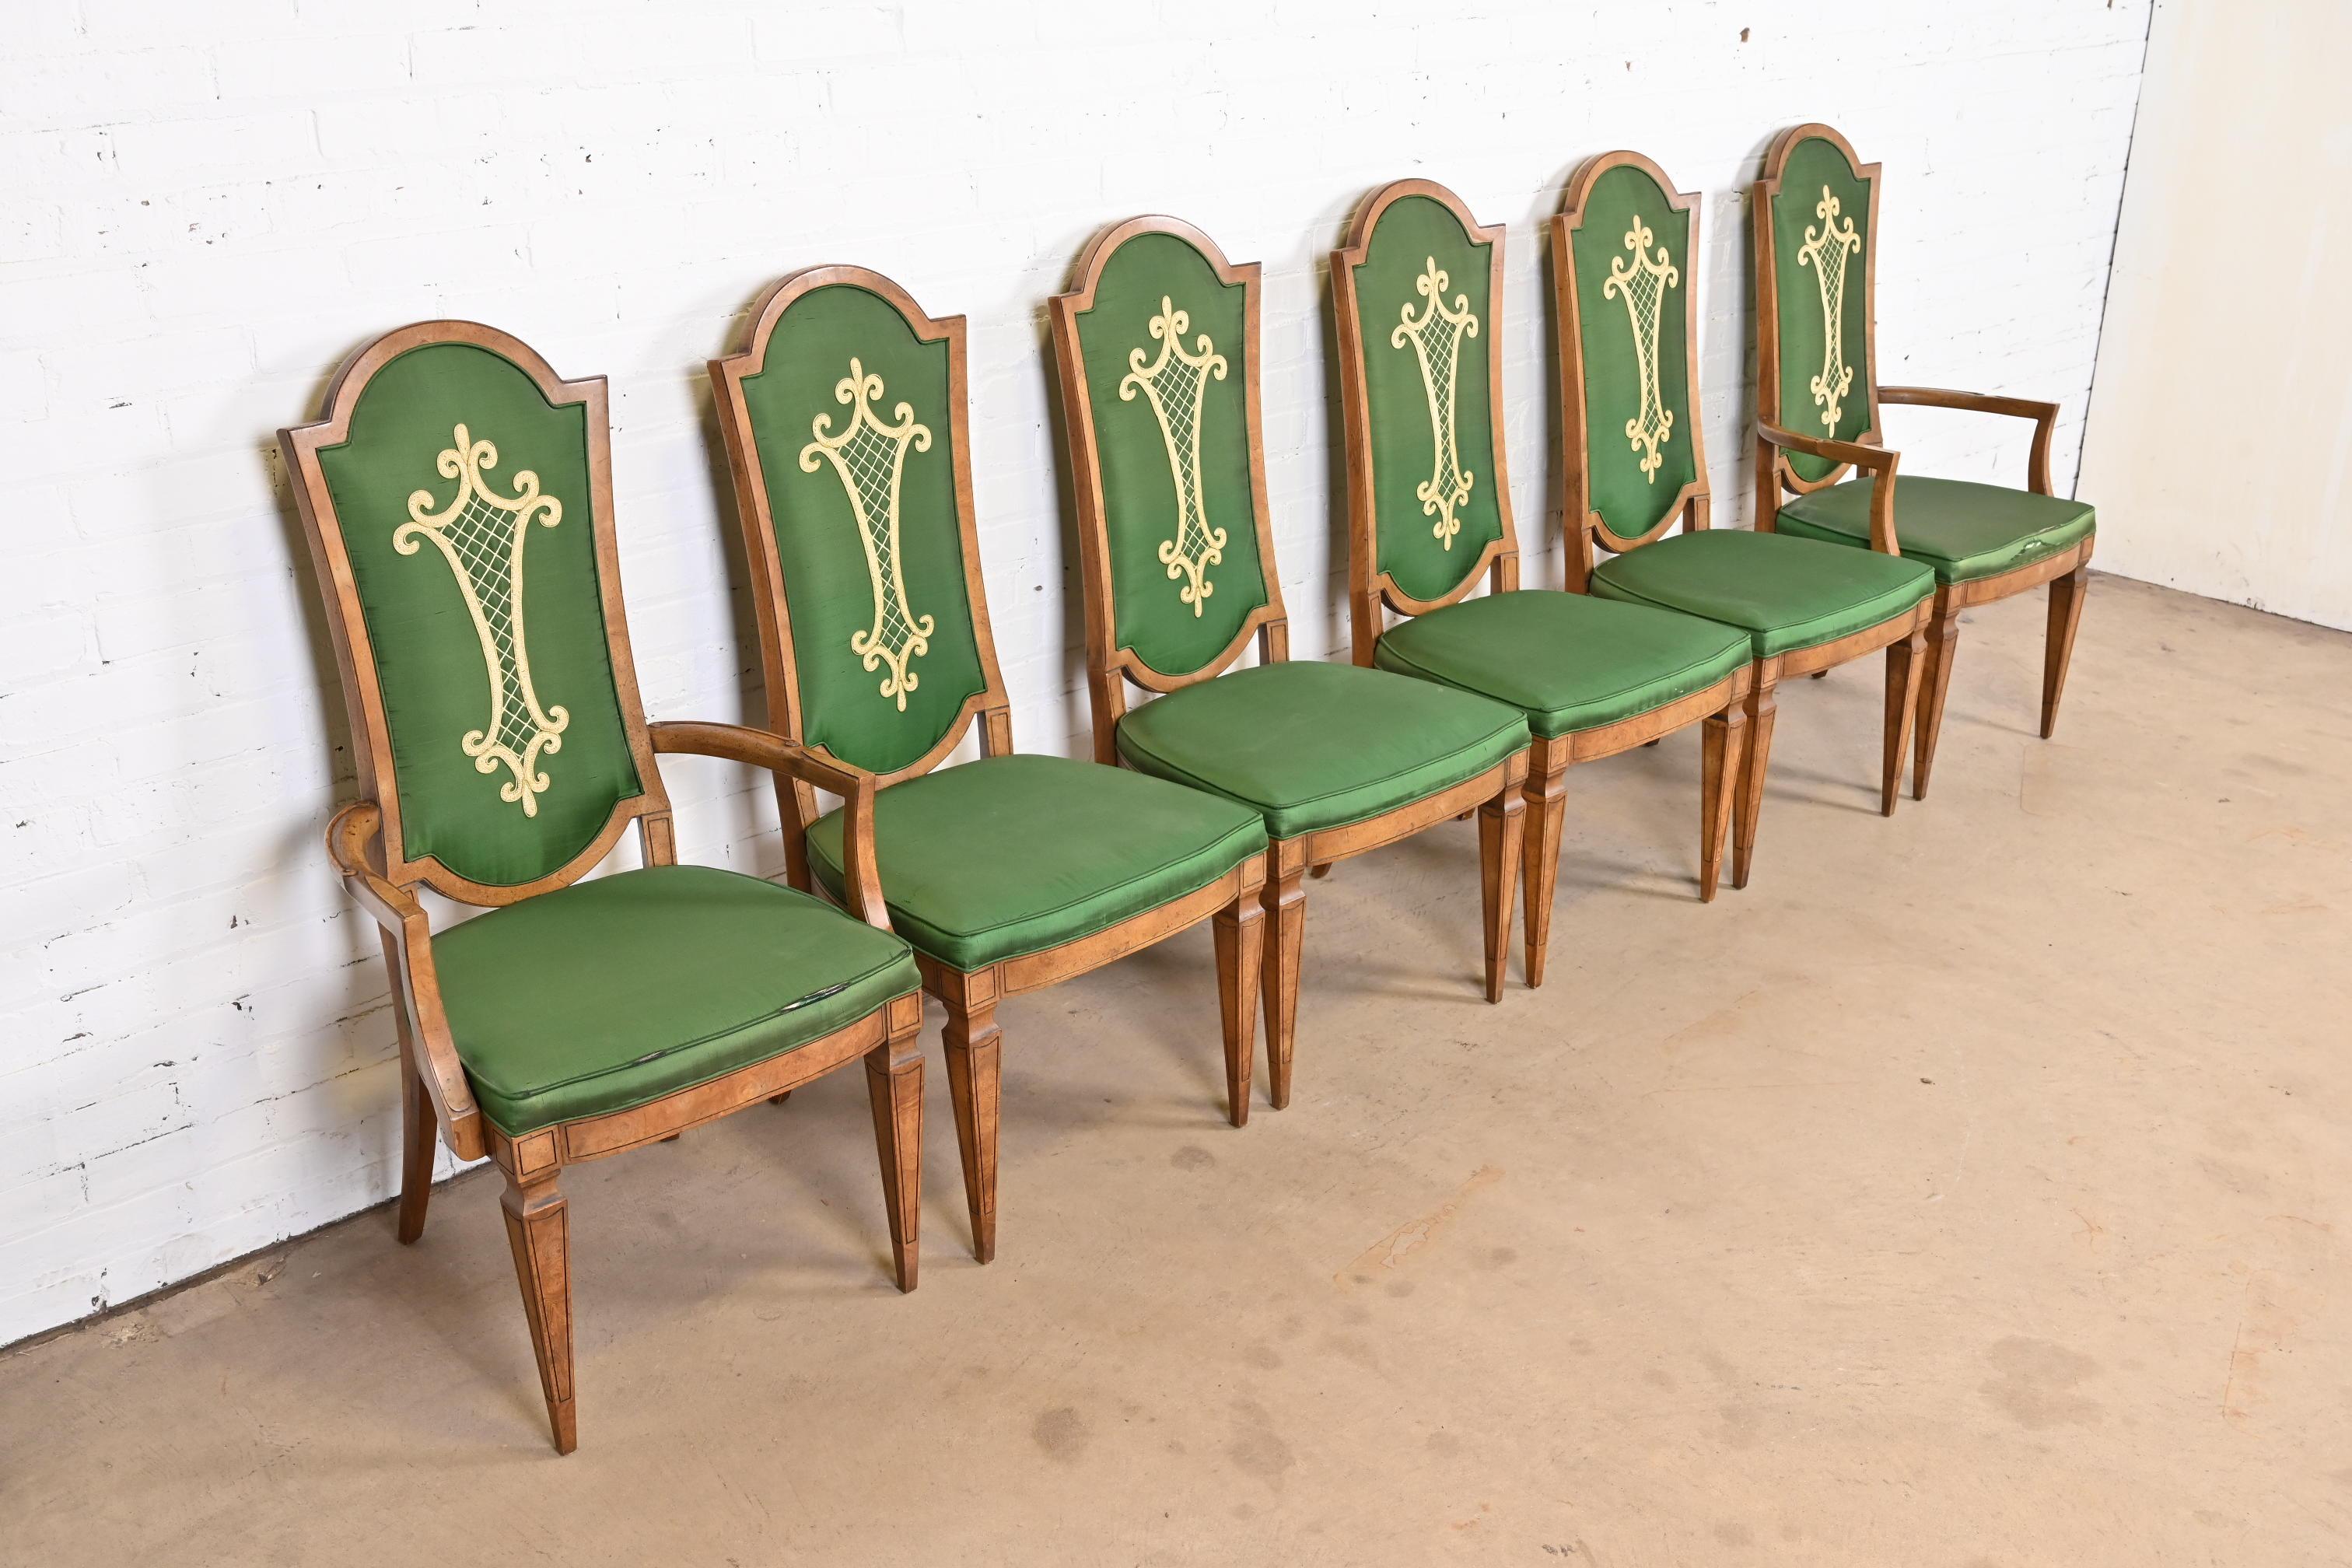 A gorgeous set of six Italian Regency or Louis XVI style dining chairs

By Mastercraft

USA, circa 1960s

Burled olive wood frames, with green upholstered seats and backs with gold embellishments.

Measures:
Side chairs - 19.75